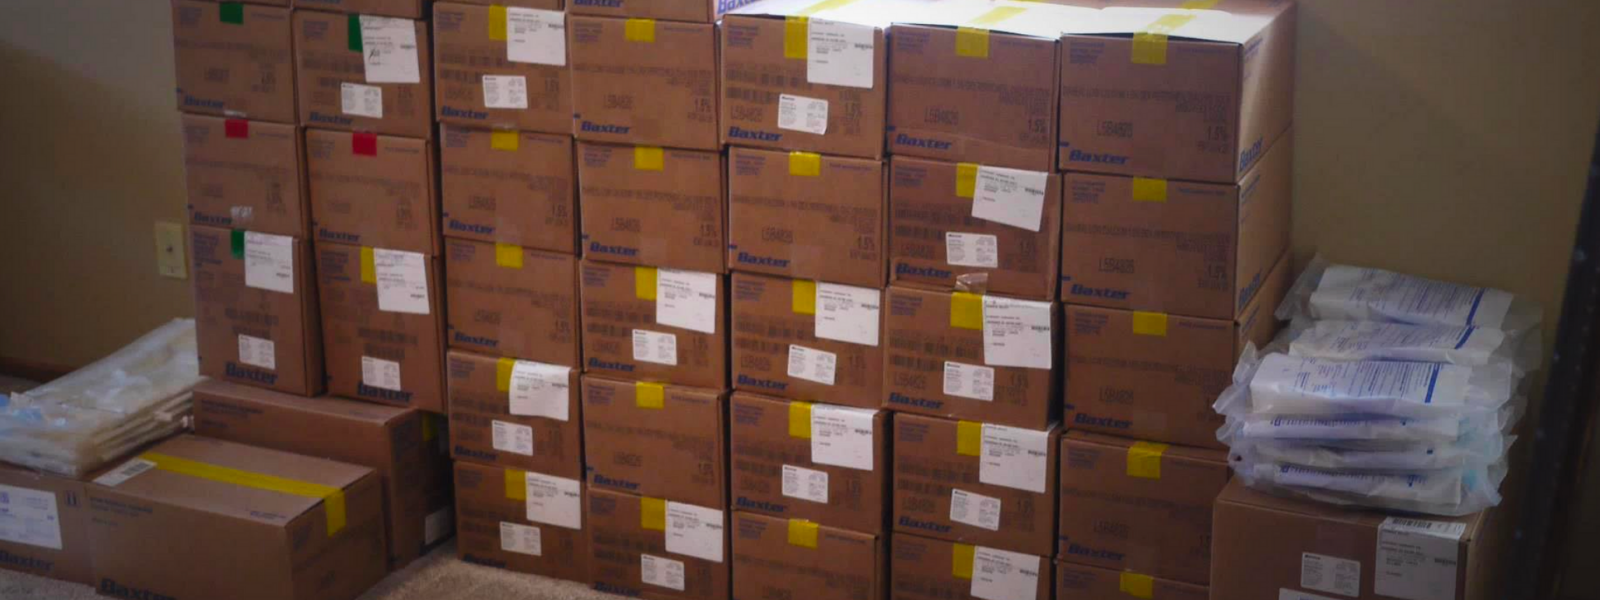 Boxes of renal care solution